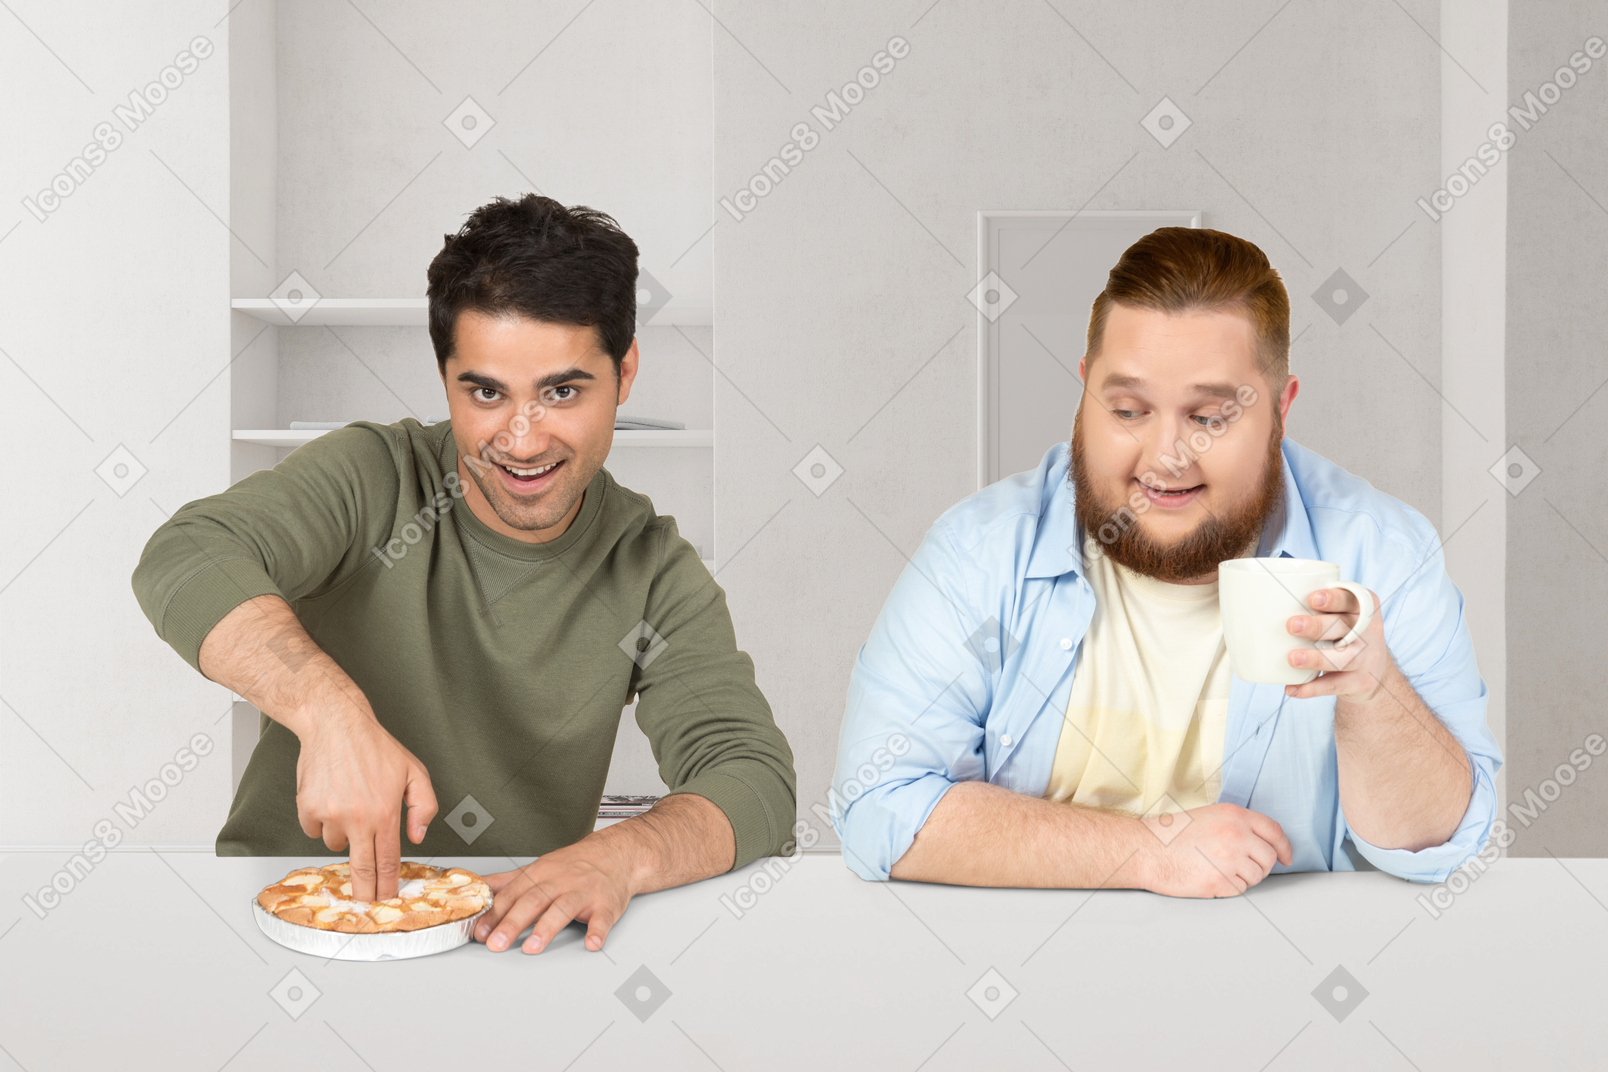 Collage of two friends sitting at the table and one of them sticking fingers into the pie